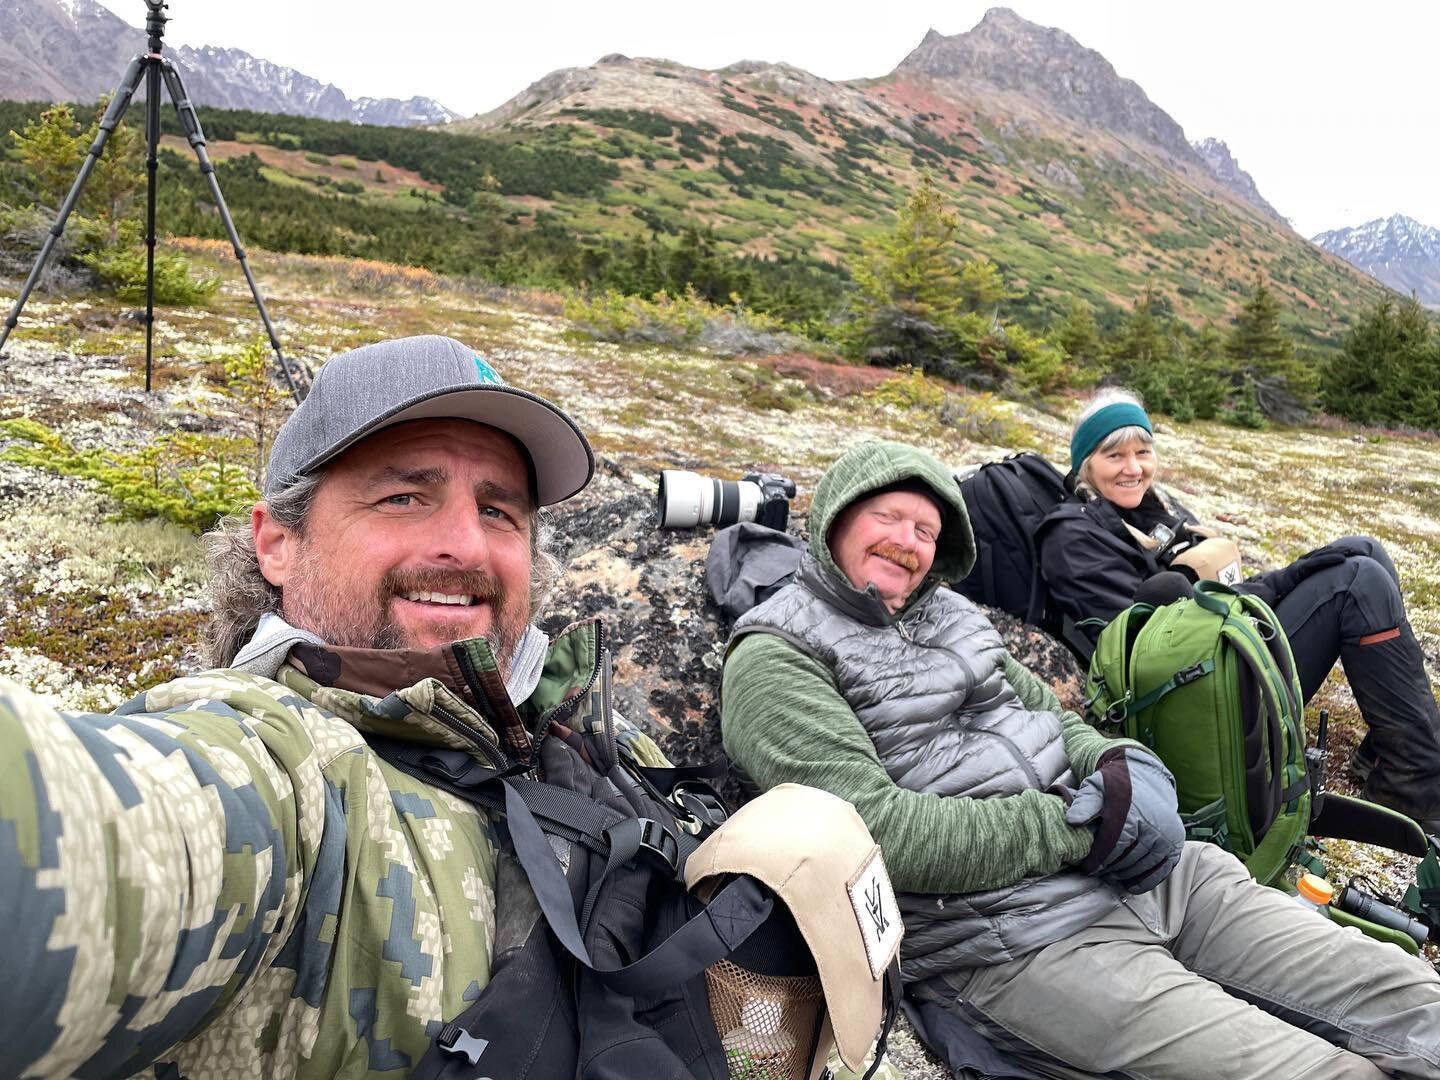 Good times on the mountain with @ray.n.alaska and @moosemanphotos looking forward to this year! #alaska #photographer #videographer